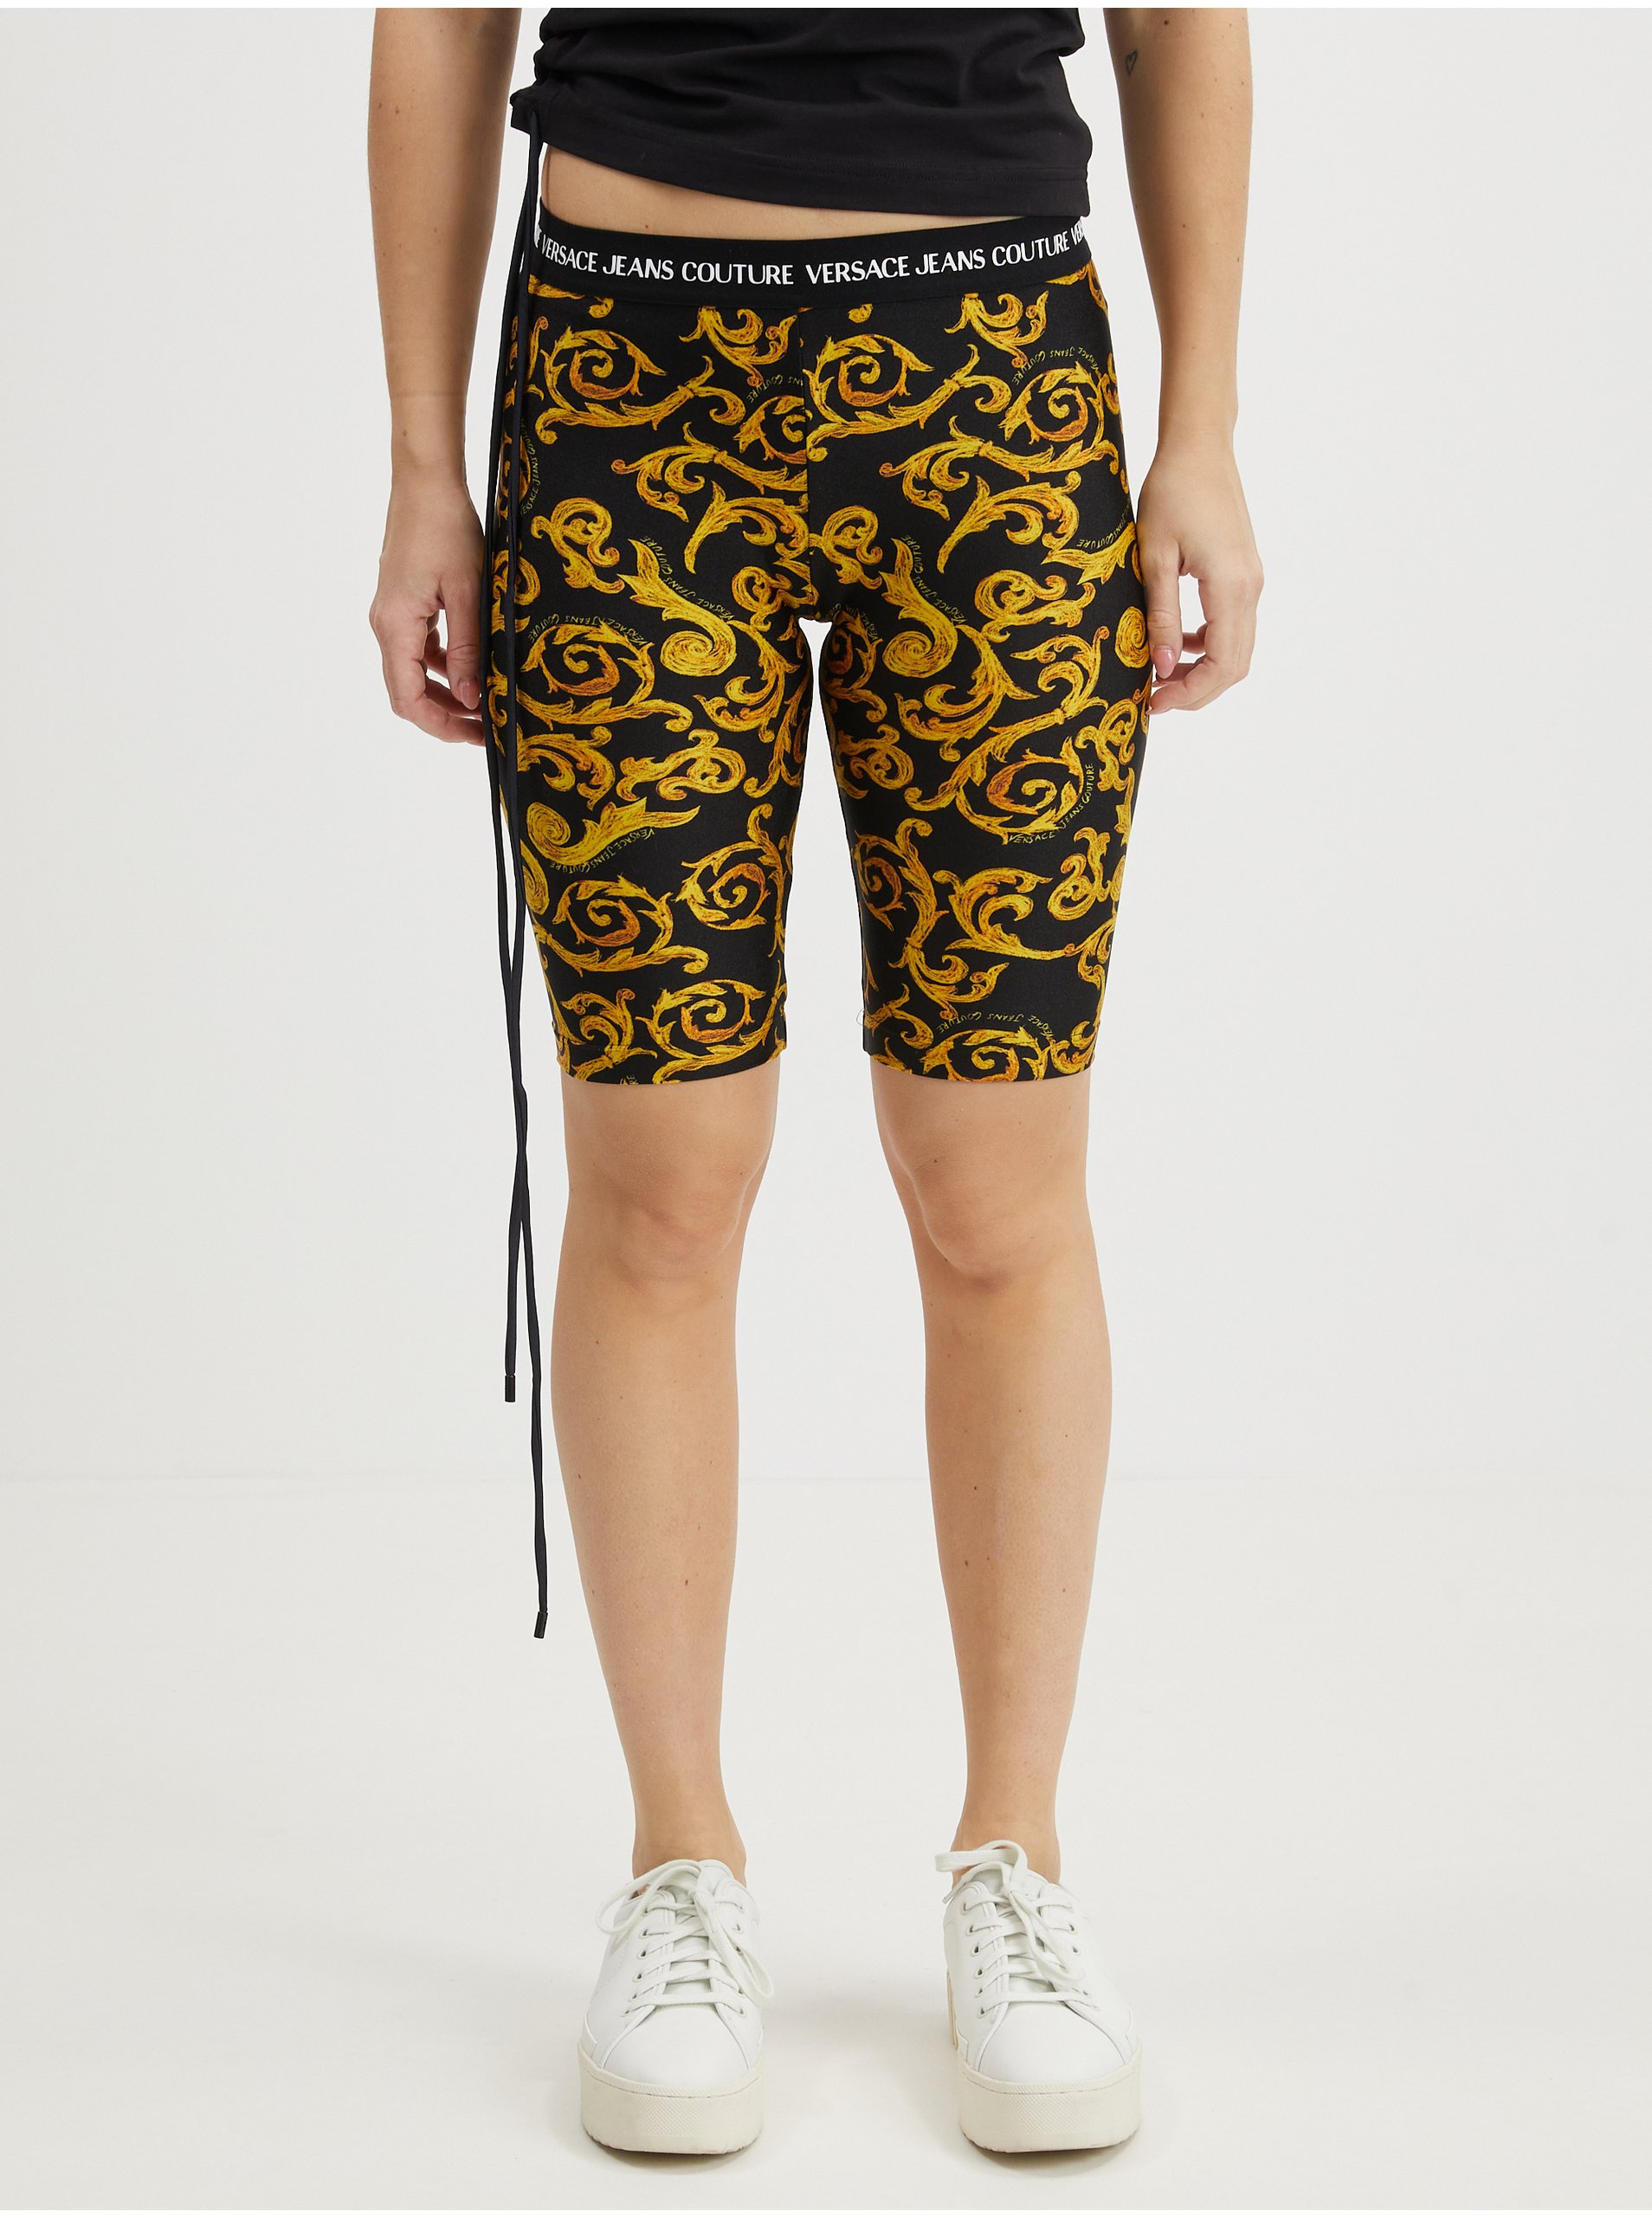 Versace Jeans Couture Yellow-Black Womens Patterned Short Leggings - Women